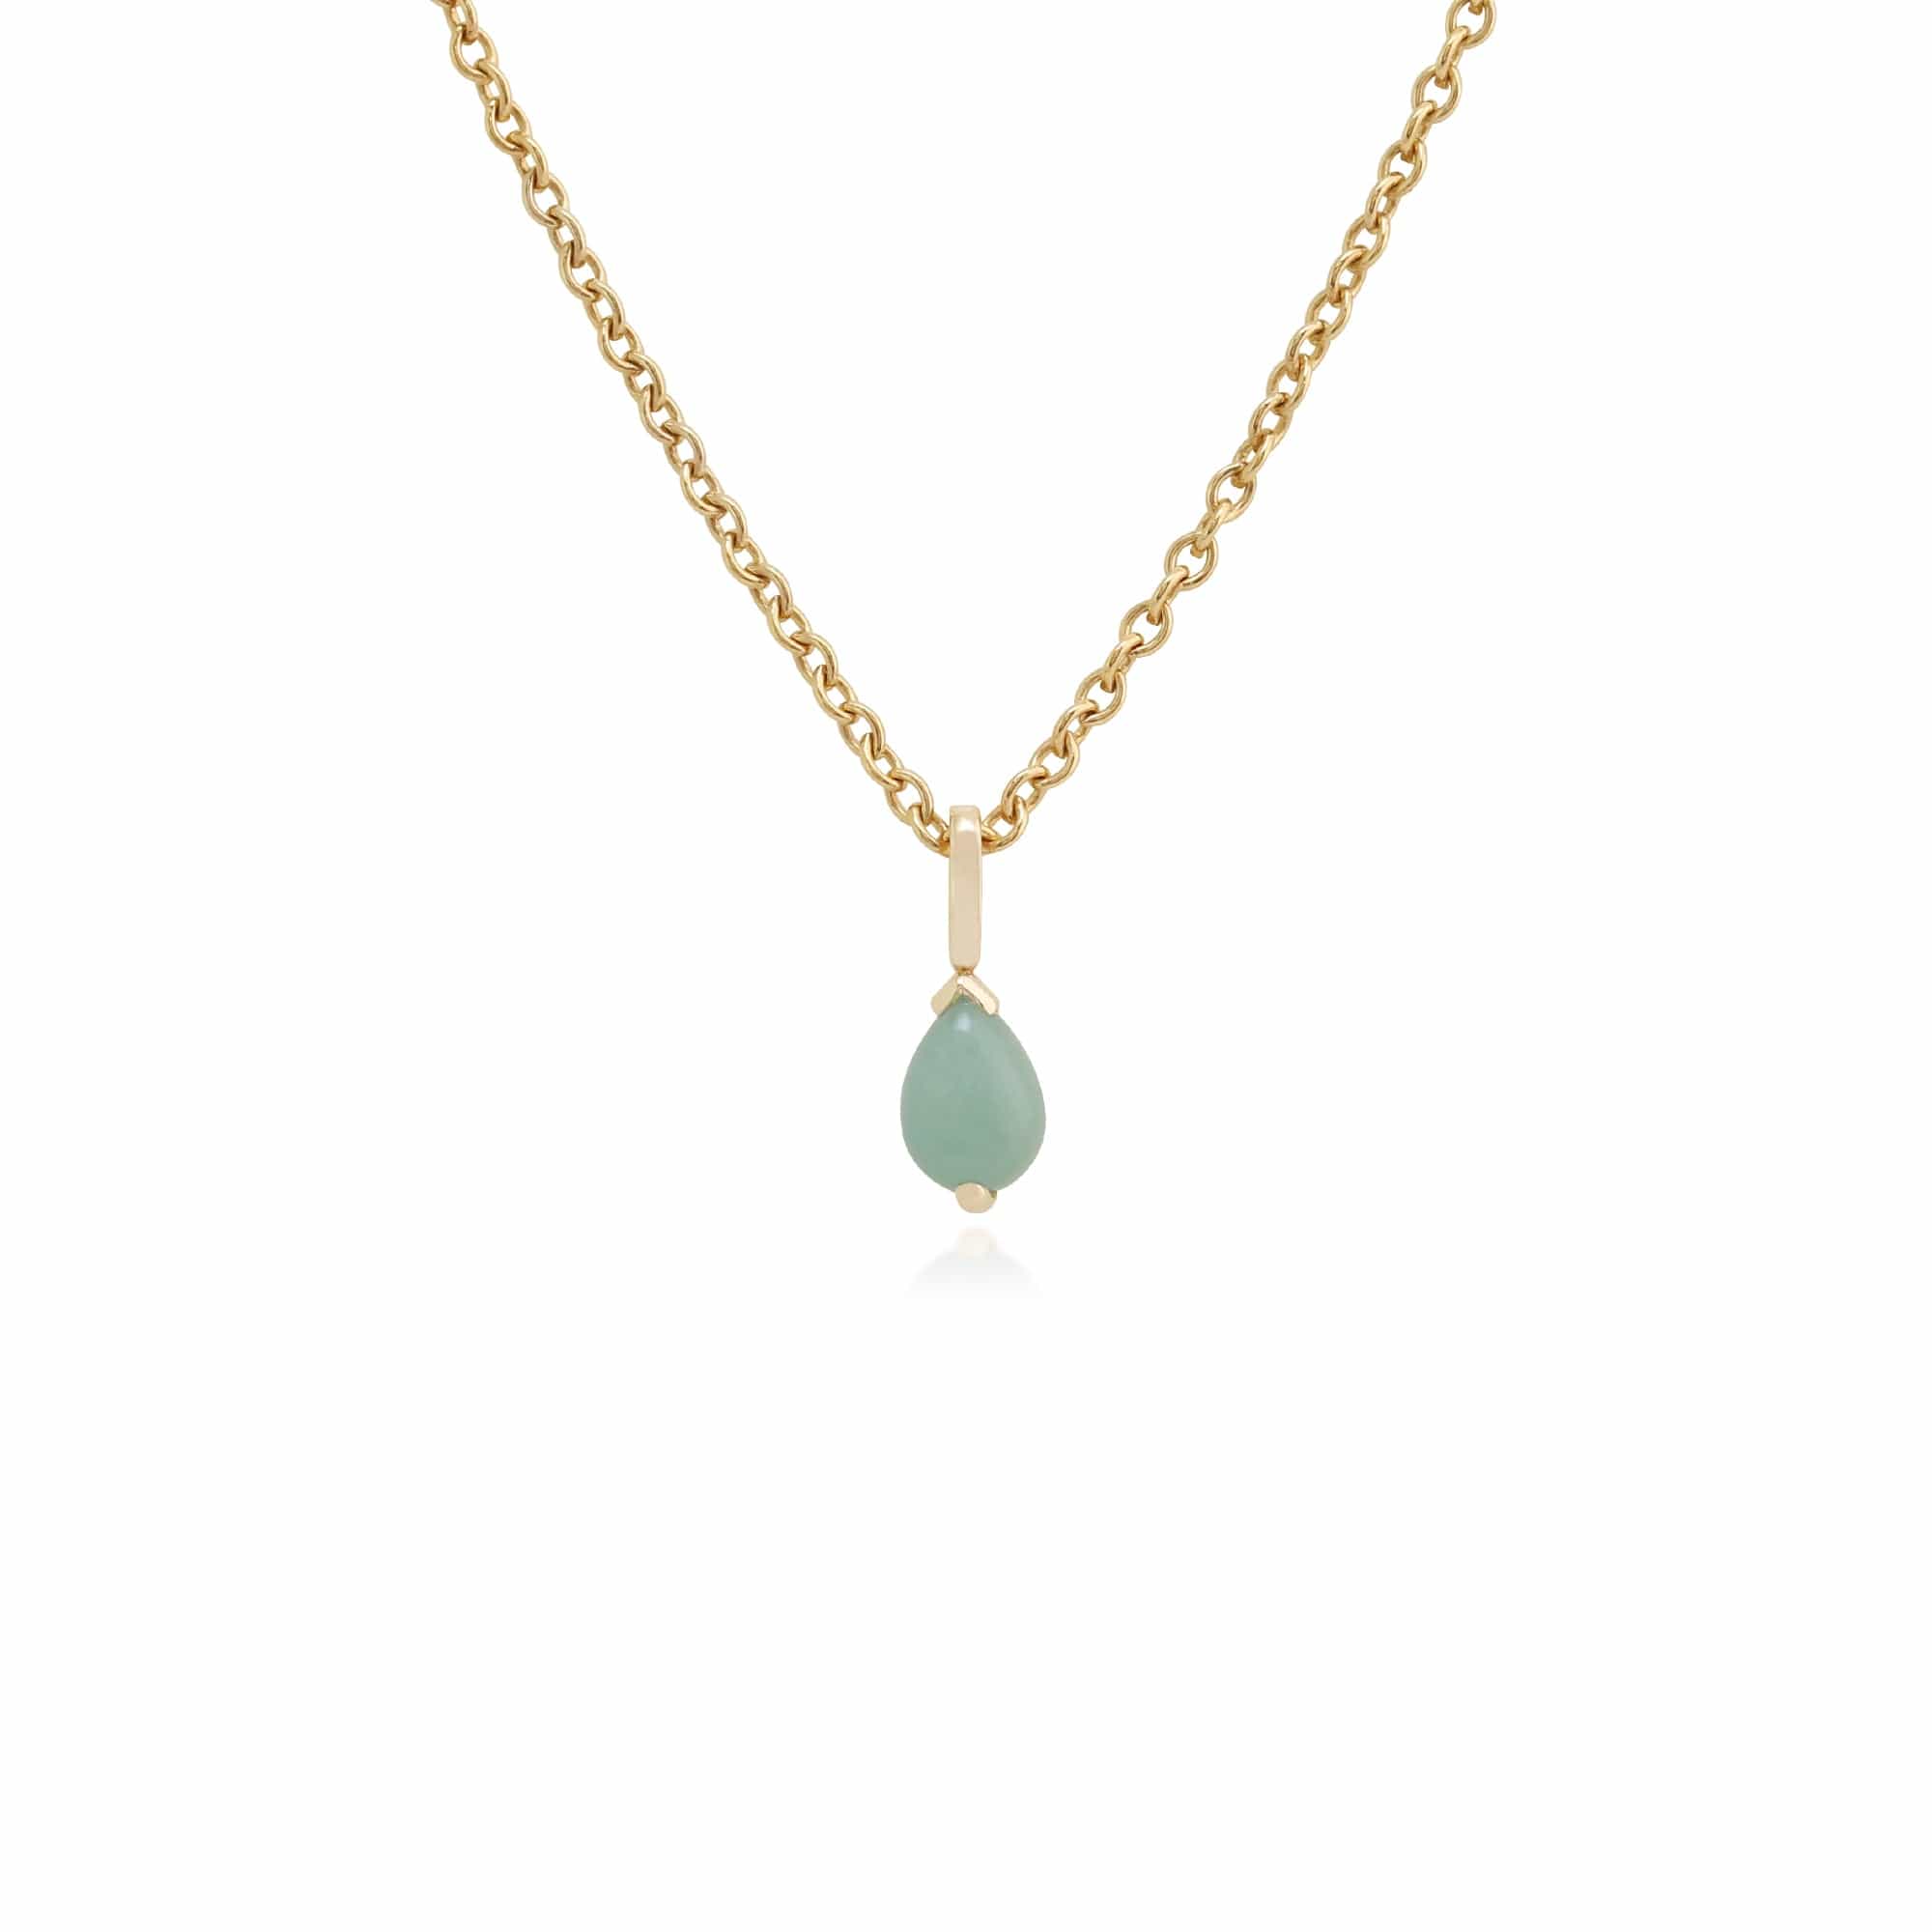 Photos - Pendant / Choker Necklace Classic Pear Green Jade Claw Set Single Stone Pendant in 9ct Yellow Gold